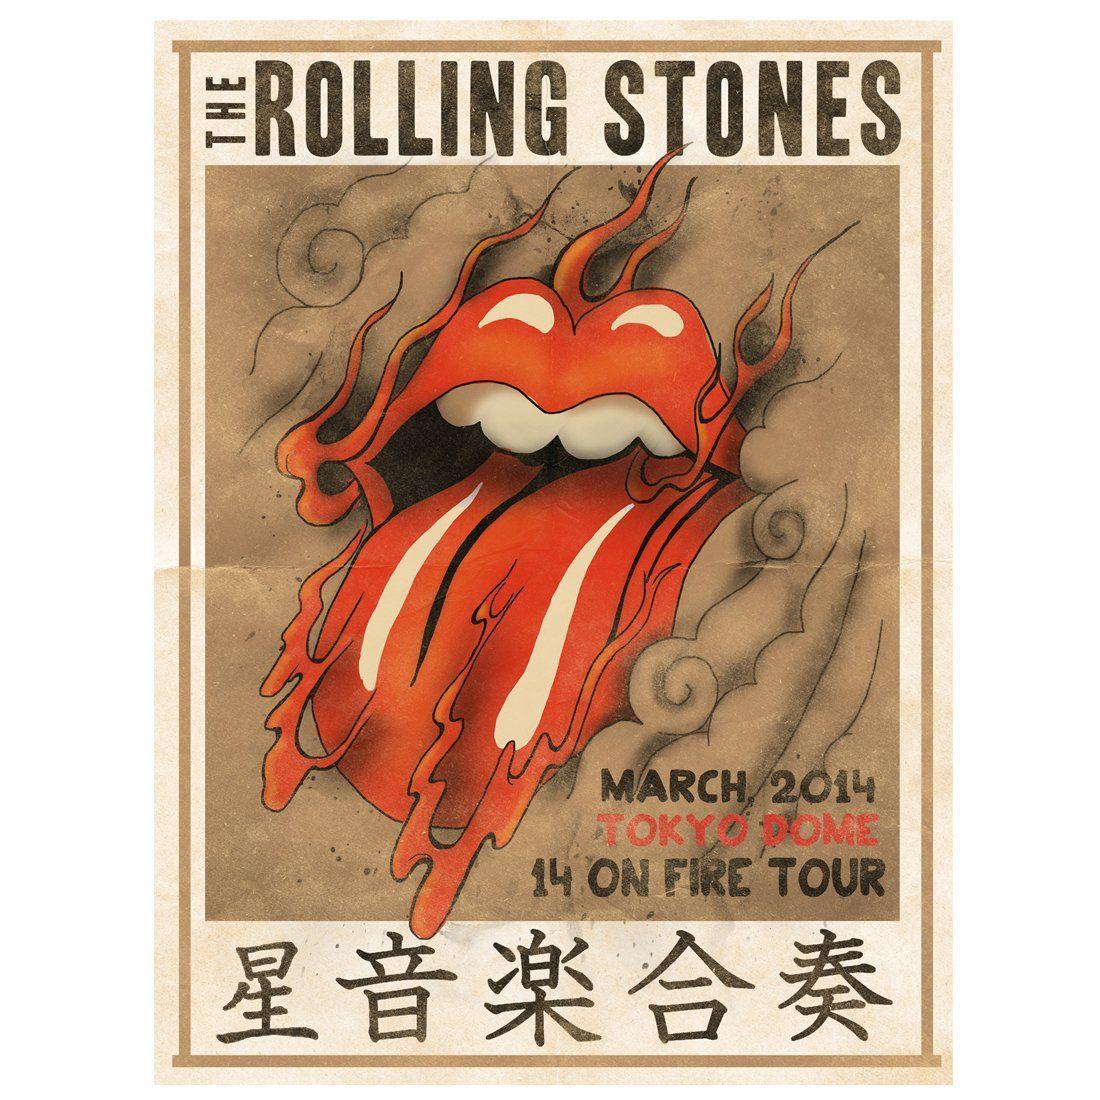 Rolling Stone Logo - Did You Know The Iconic Rolling Stones Logo Was Inspired By The ...